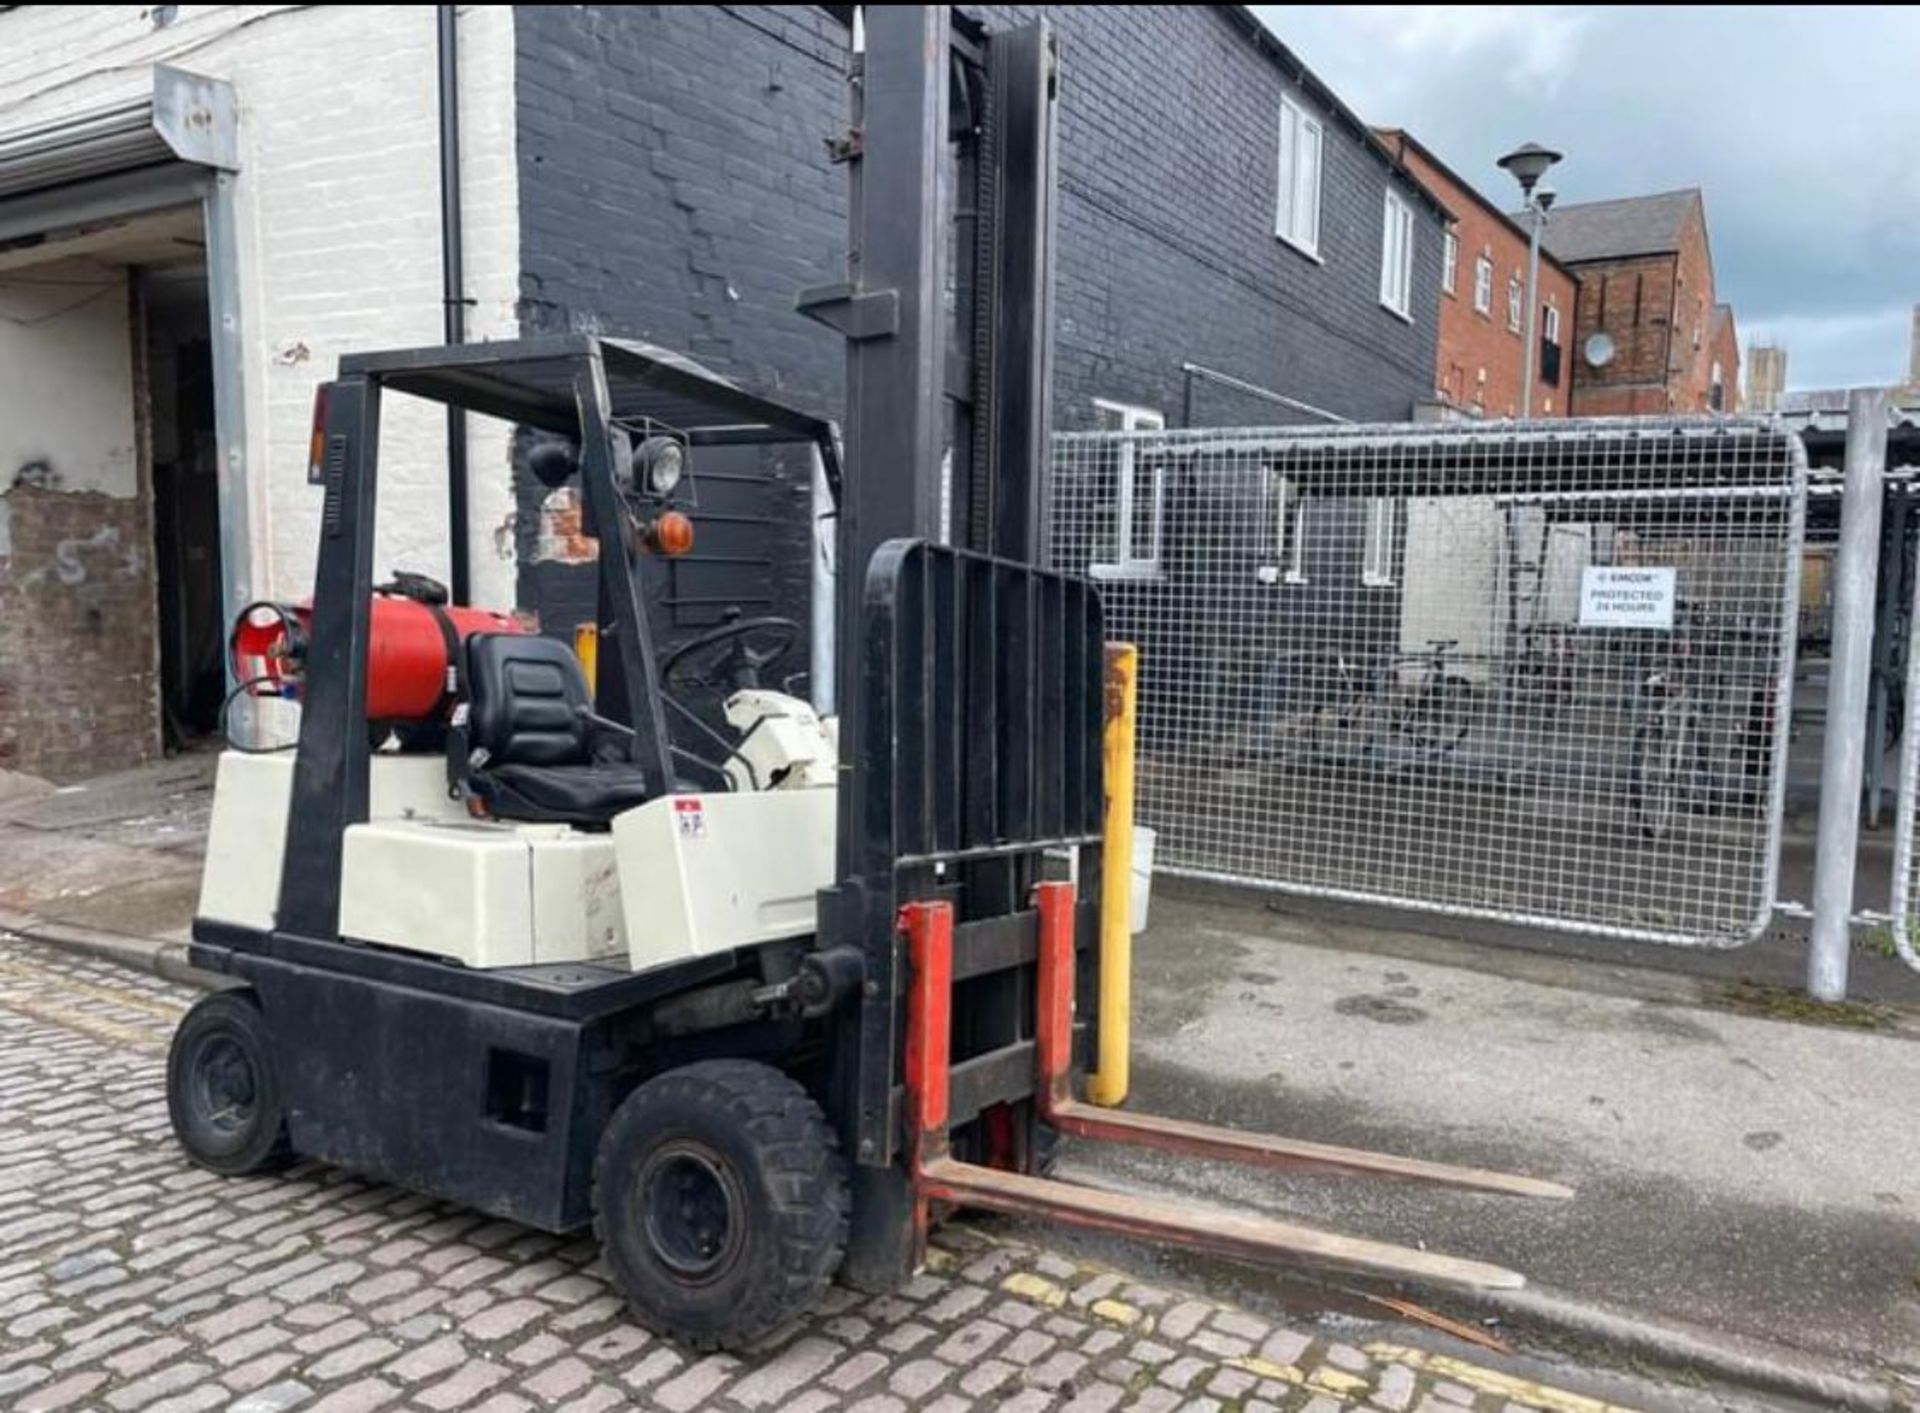 NISSAN 2.5TON GAS FORKLIFT - 5430 HOURS